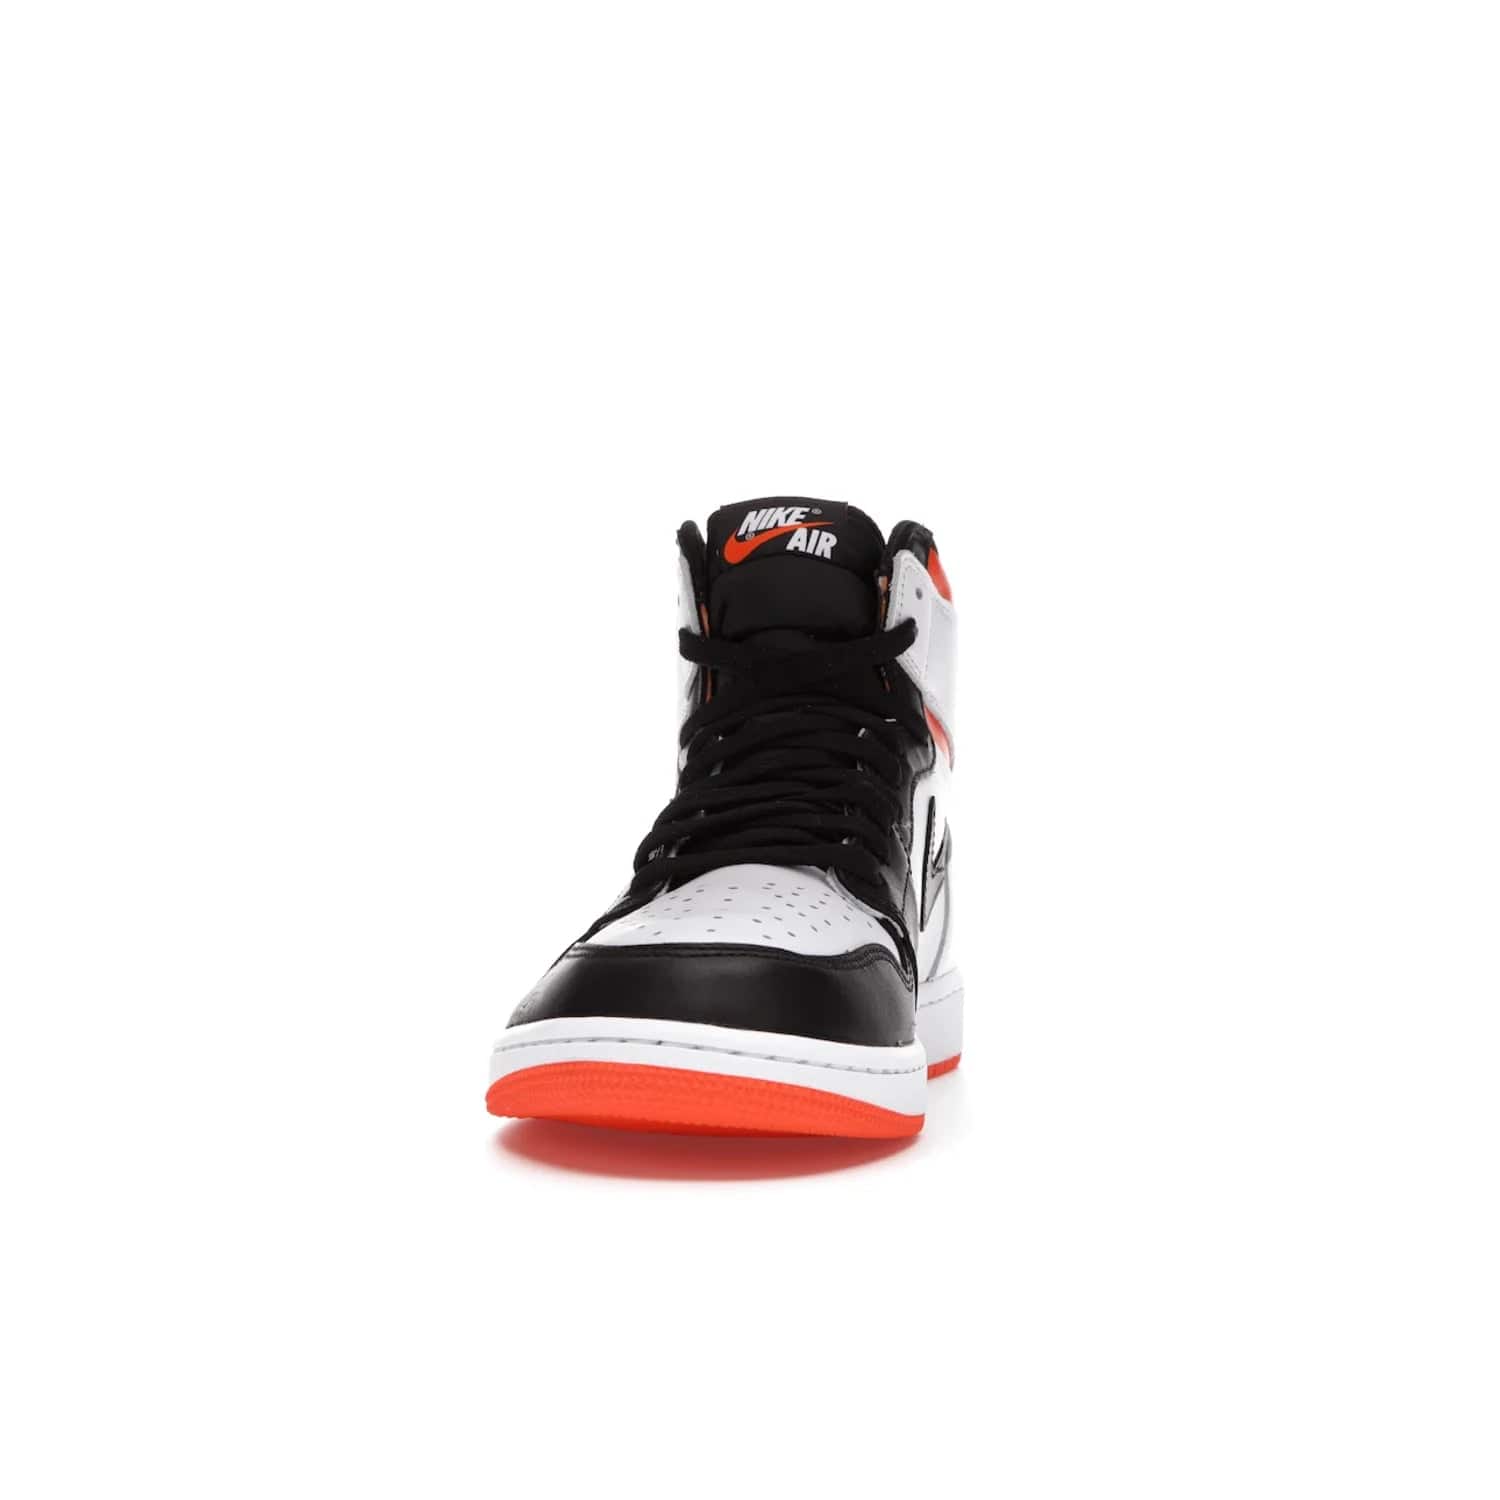 Jordan 1 Retro High Electro Orange - Image 11 - Only at www.BallersClubKickz.com - This Air Jordan 1 Retro High Electro Orange features a white leather upper with black overlays and vibrant Hyper Orange ankle wrap. Turn heads with this iconic design of woven tongue label and sole. Get yours today and add some serious style to your rotation.